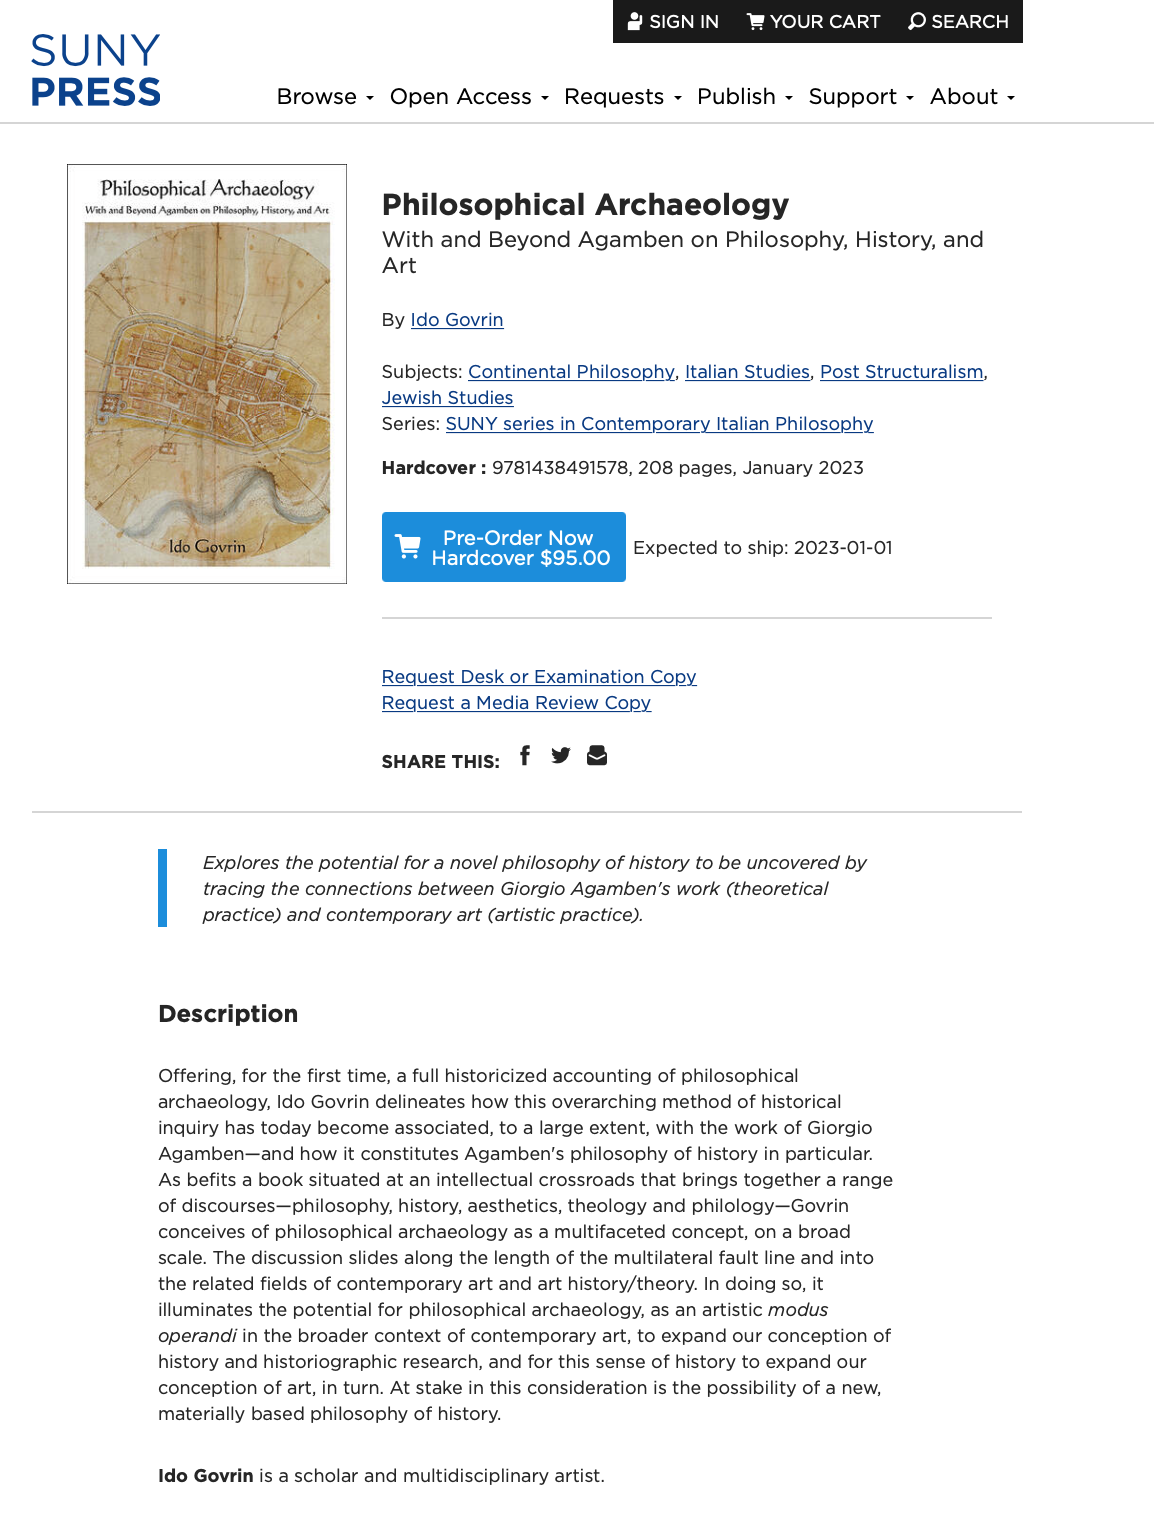 Screenshot of the book listing for Philosophical Archeology on SUNY Press